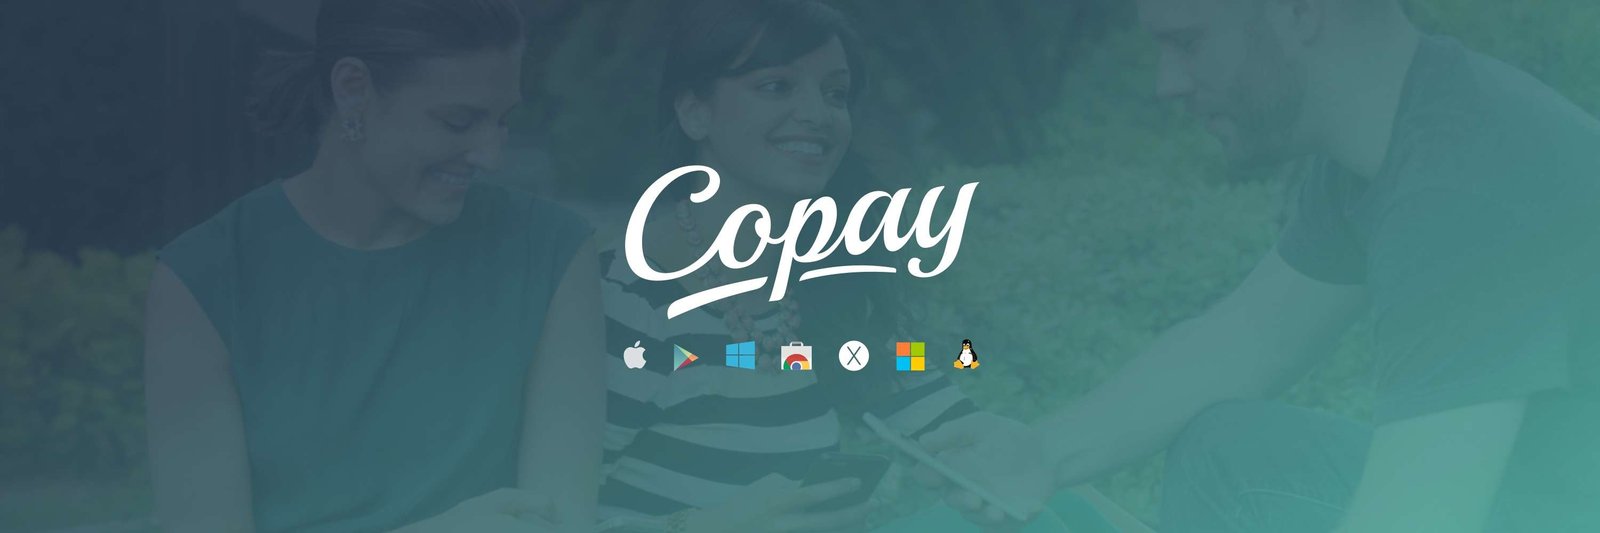 Copay review the interface